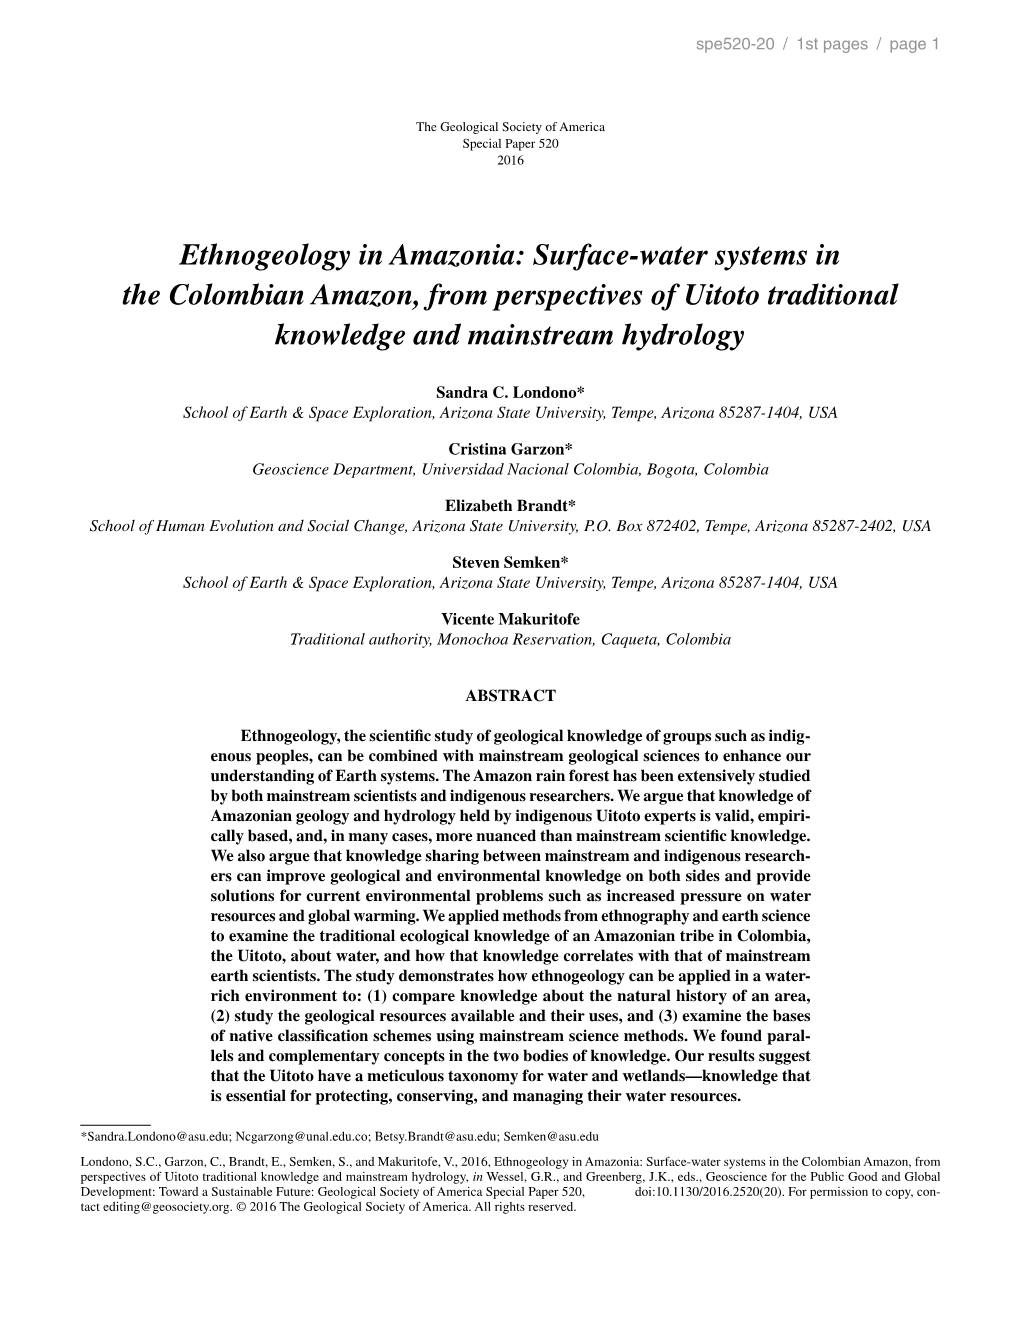 Ethnogeology in Amazonia: Surface-Water Systems in the Colombian Amazon, from Perspectives of Uitoto Traditional Knowledge and Mainstream Hydrology